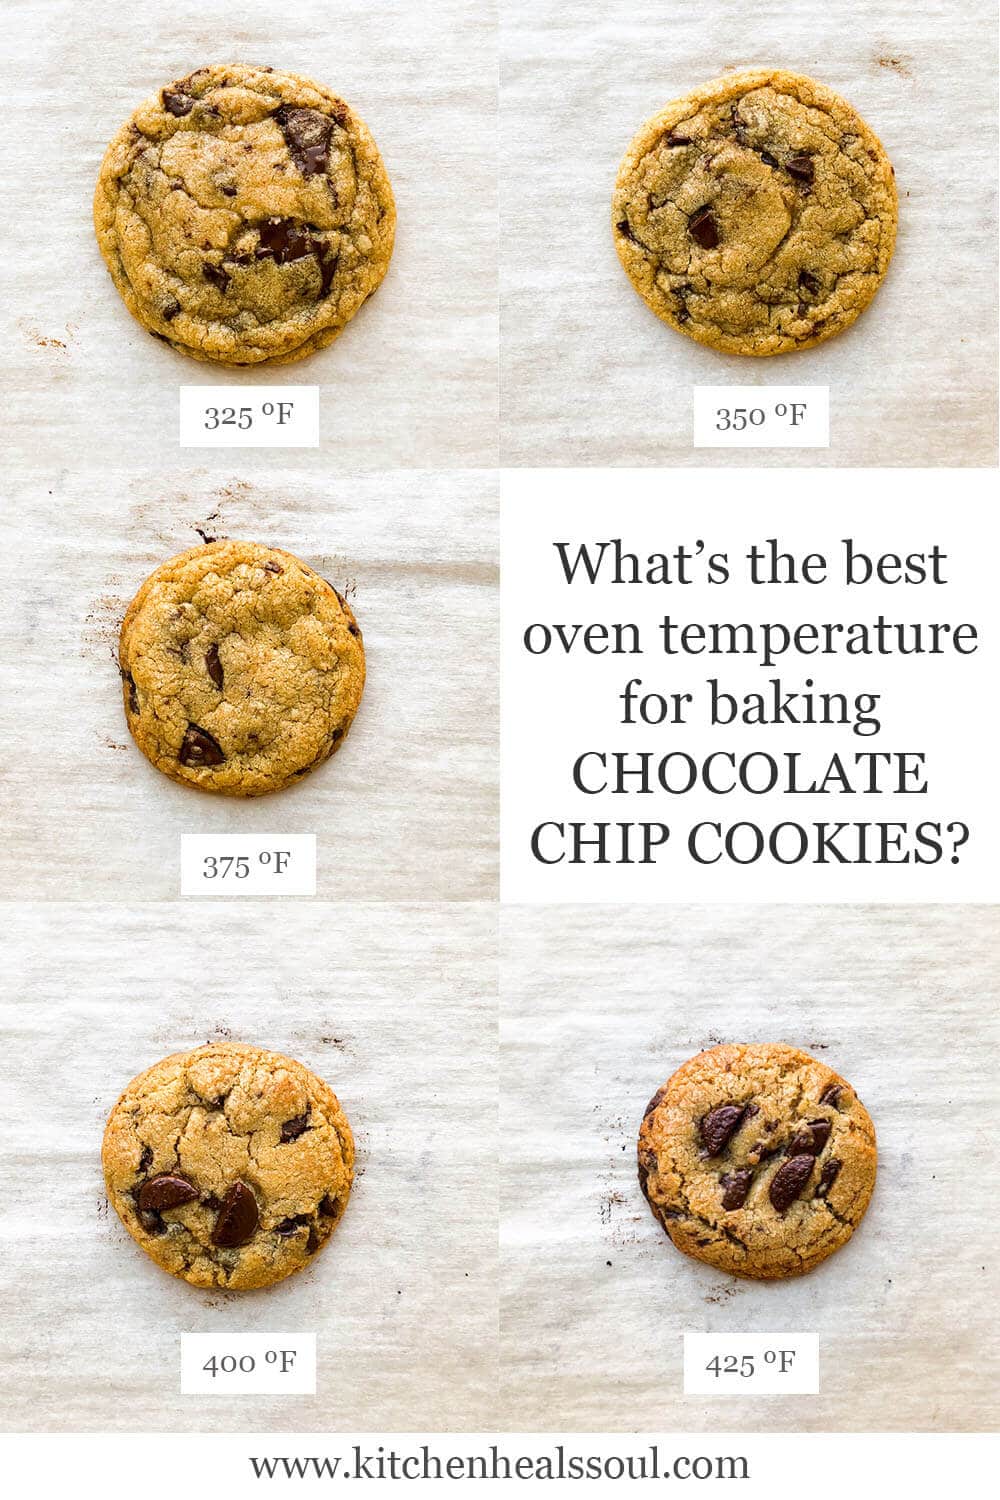 Image showing chocolate chip cookies baked at different oven temperatures: at 325F, cookies are more spread out, but they progressively spread left as you increase oven temperature all the way to 425F leading to a thicker more squat cookie that browns more on the edges